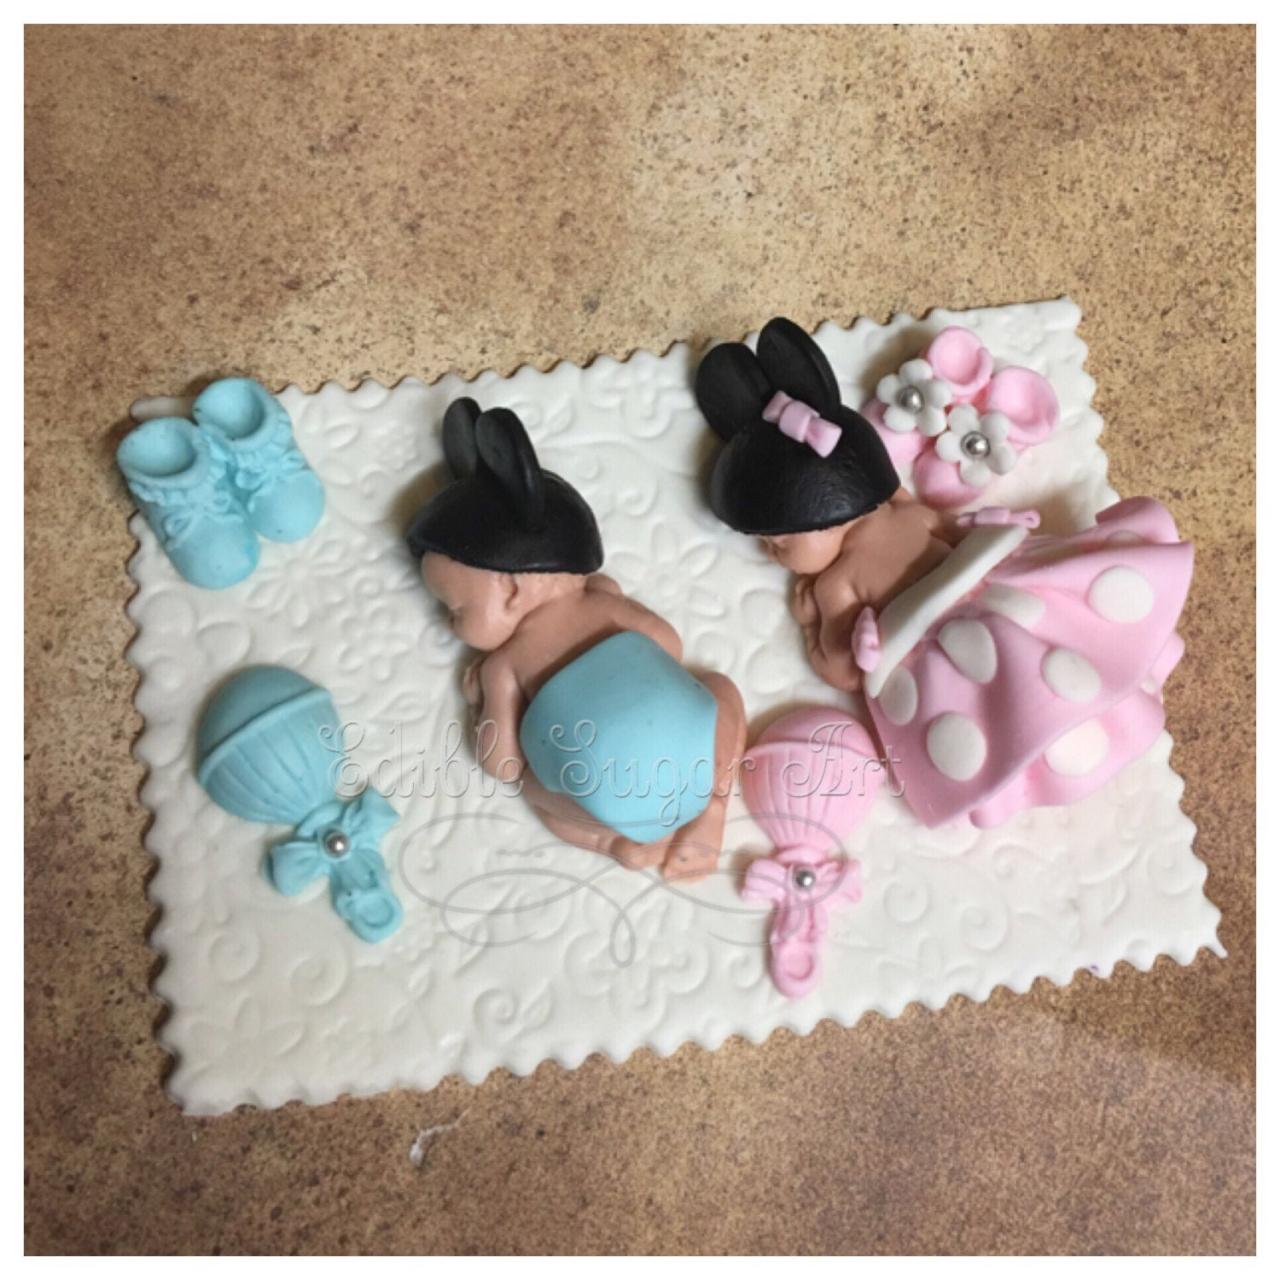 Twin MINNIE MICKEY Mouse BABY Shower Fondant Cake Topper Baby and quilt Minnie mouse quilt Nursery Invitations Minni baby shower cake topper